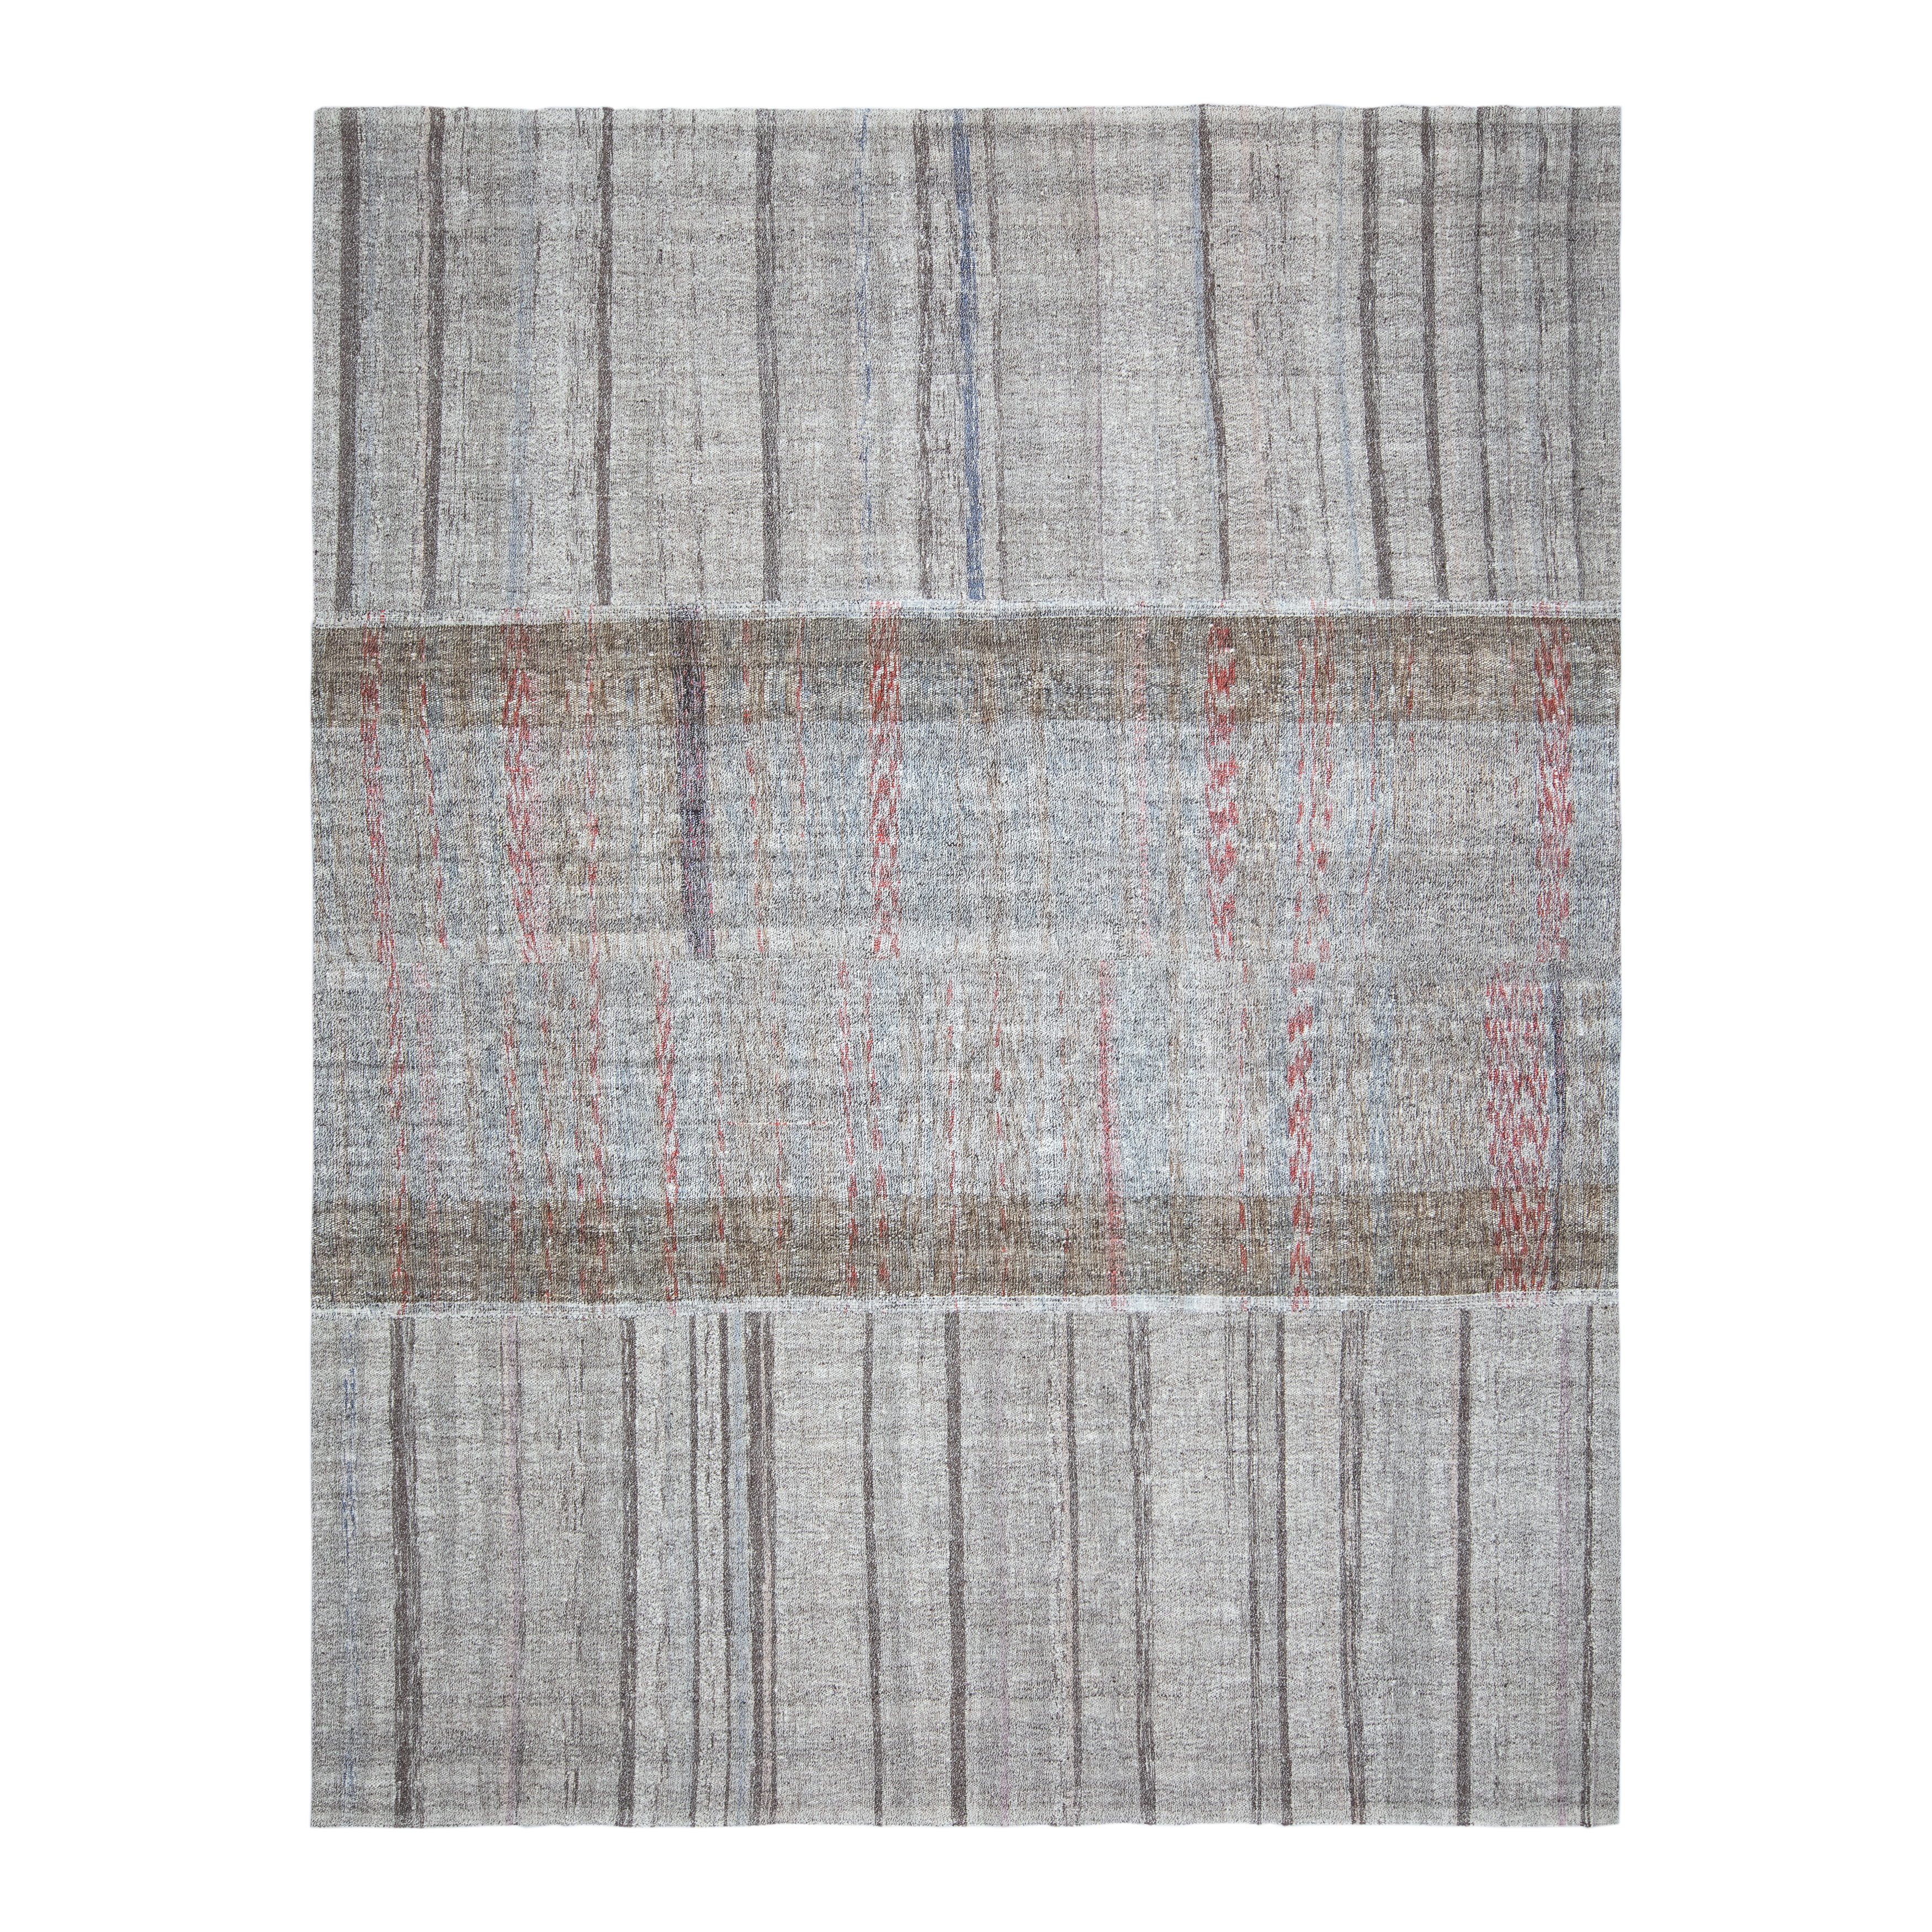 This Vintage flatweave embodies the minimalist sophistication that emerged in the mid-20th century which continues to thrive today.